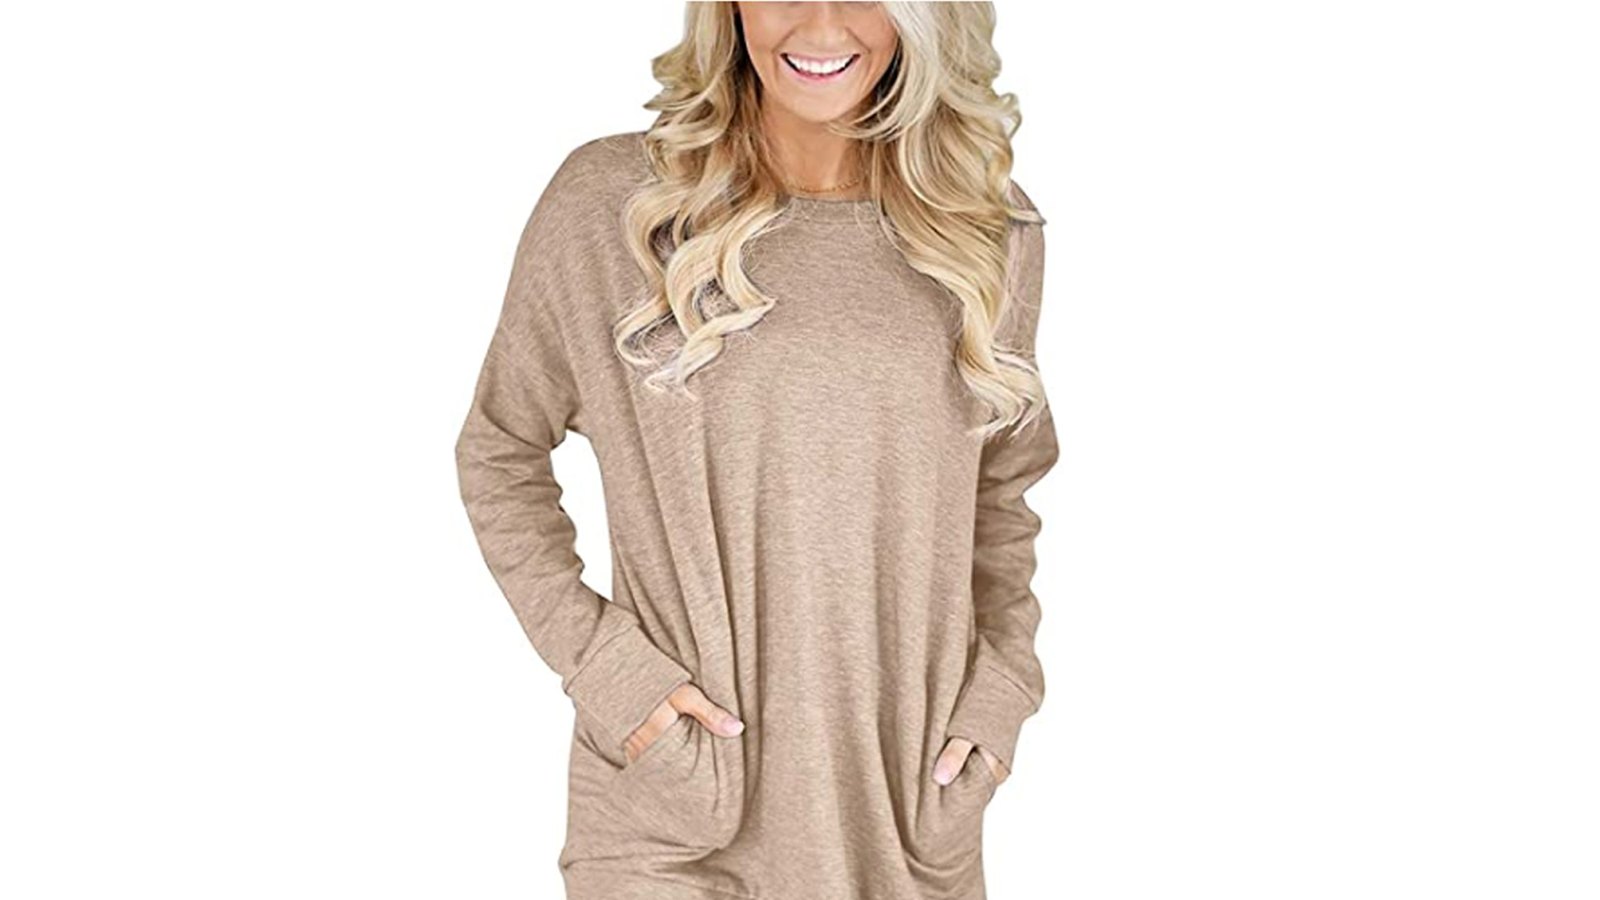 Bingerlily Women's Casual Long Sleeve Tunic Crew Neck Top with Pockets